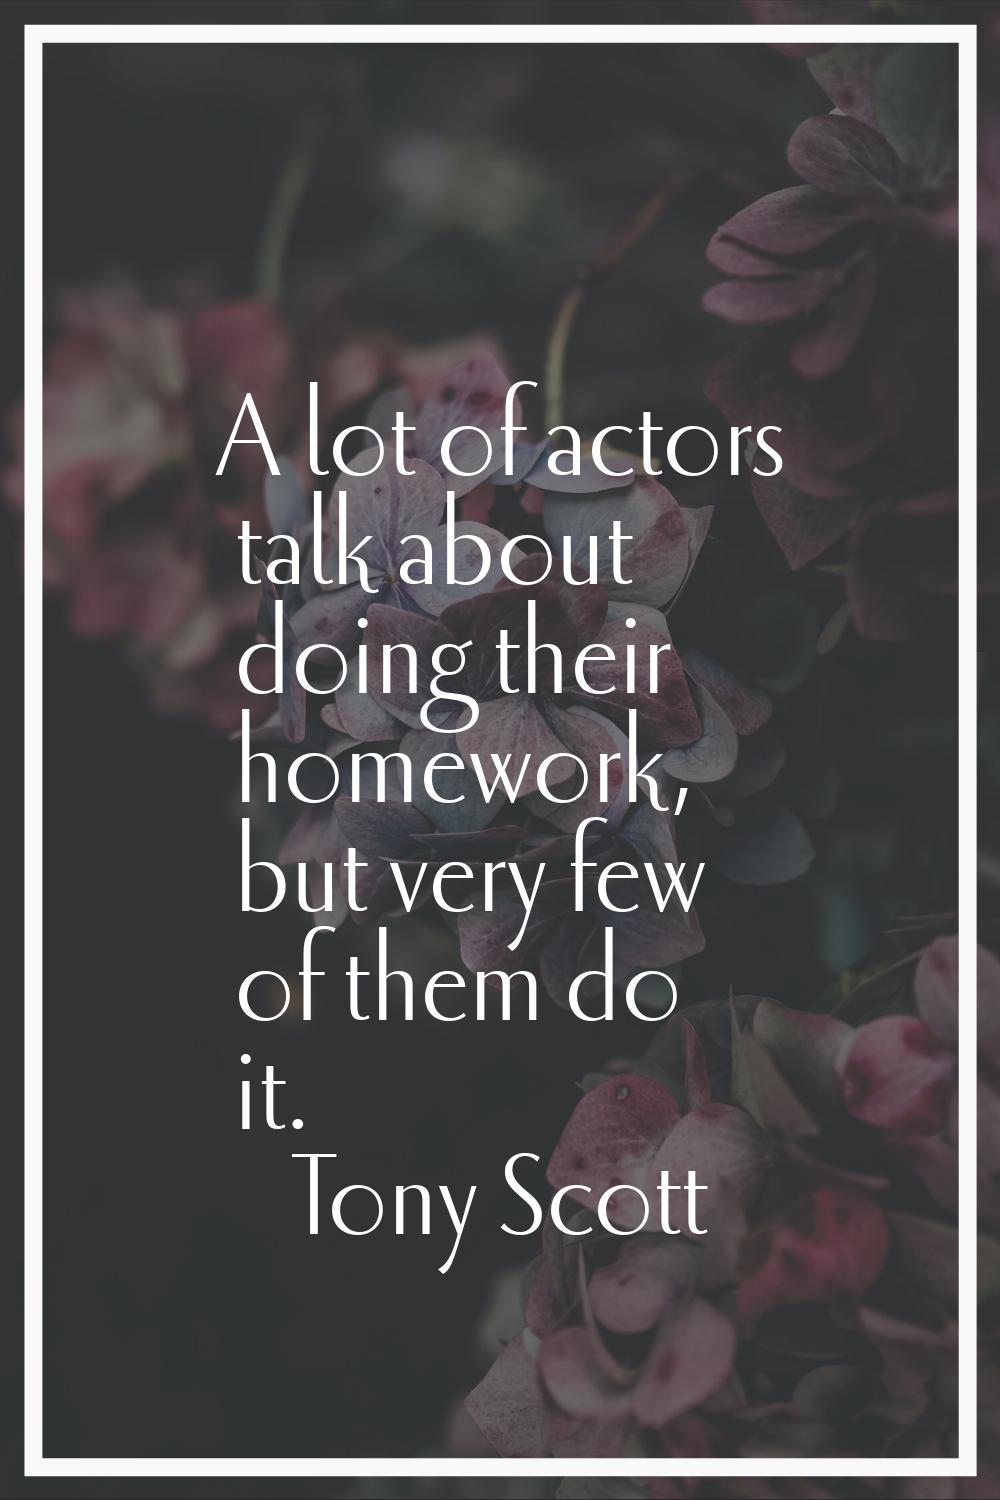 A lot of actors talk about doing their homework, but very few of them do it.